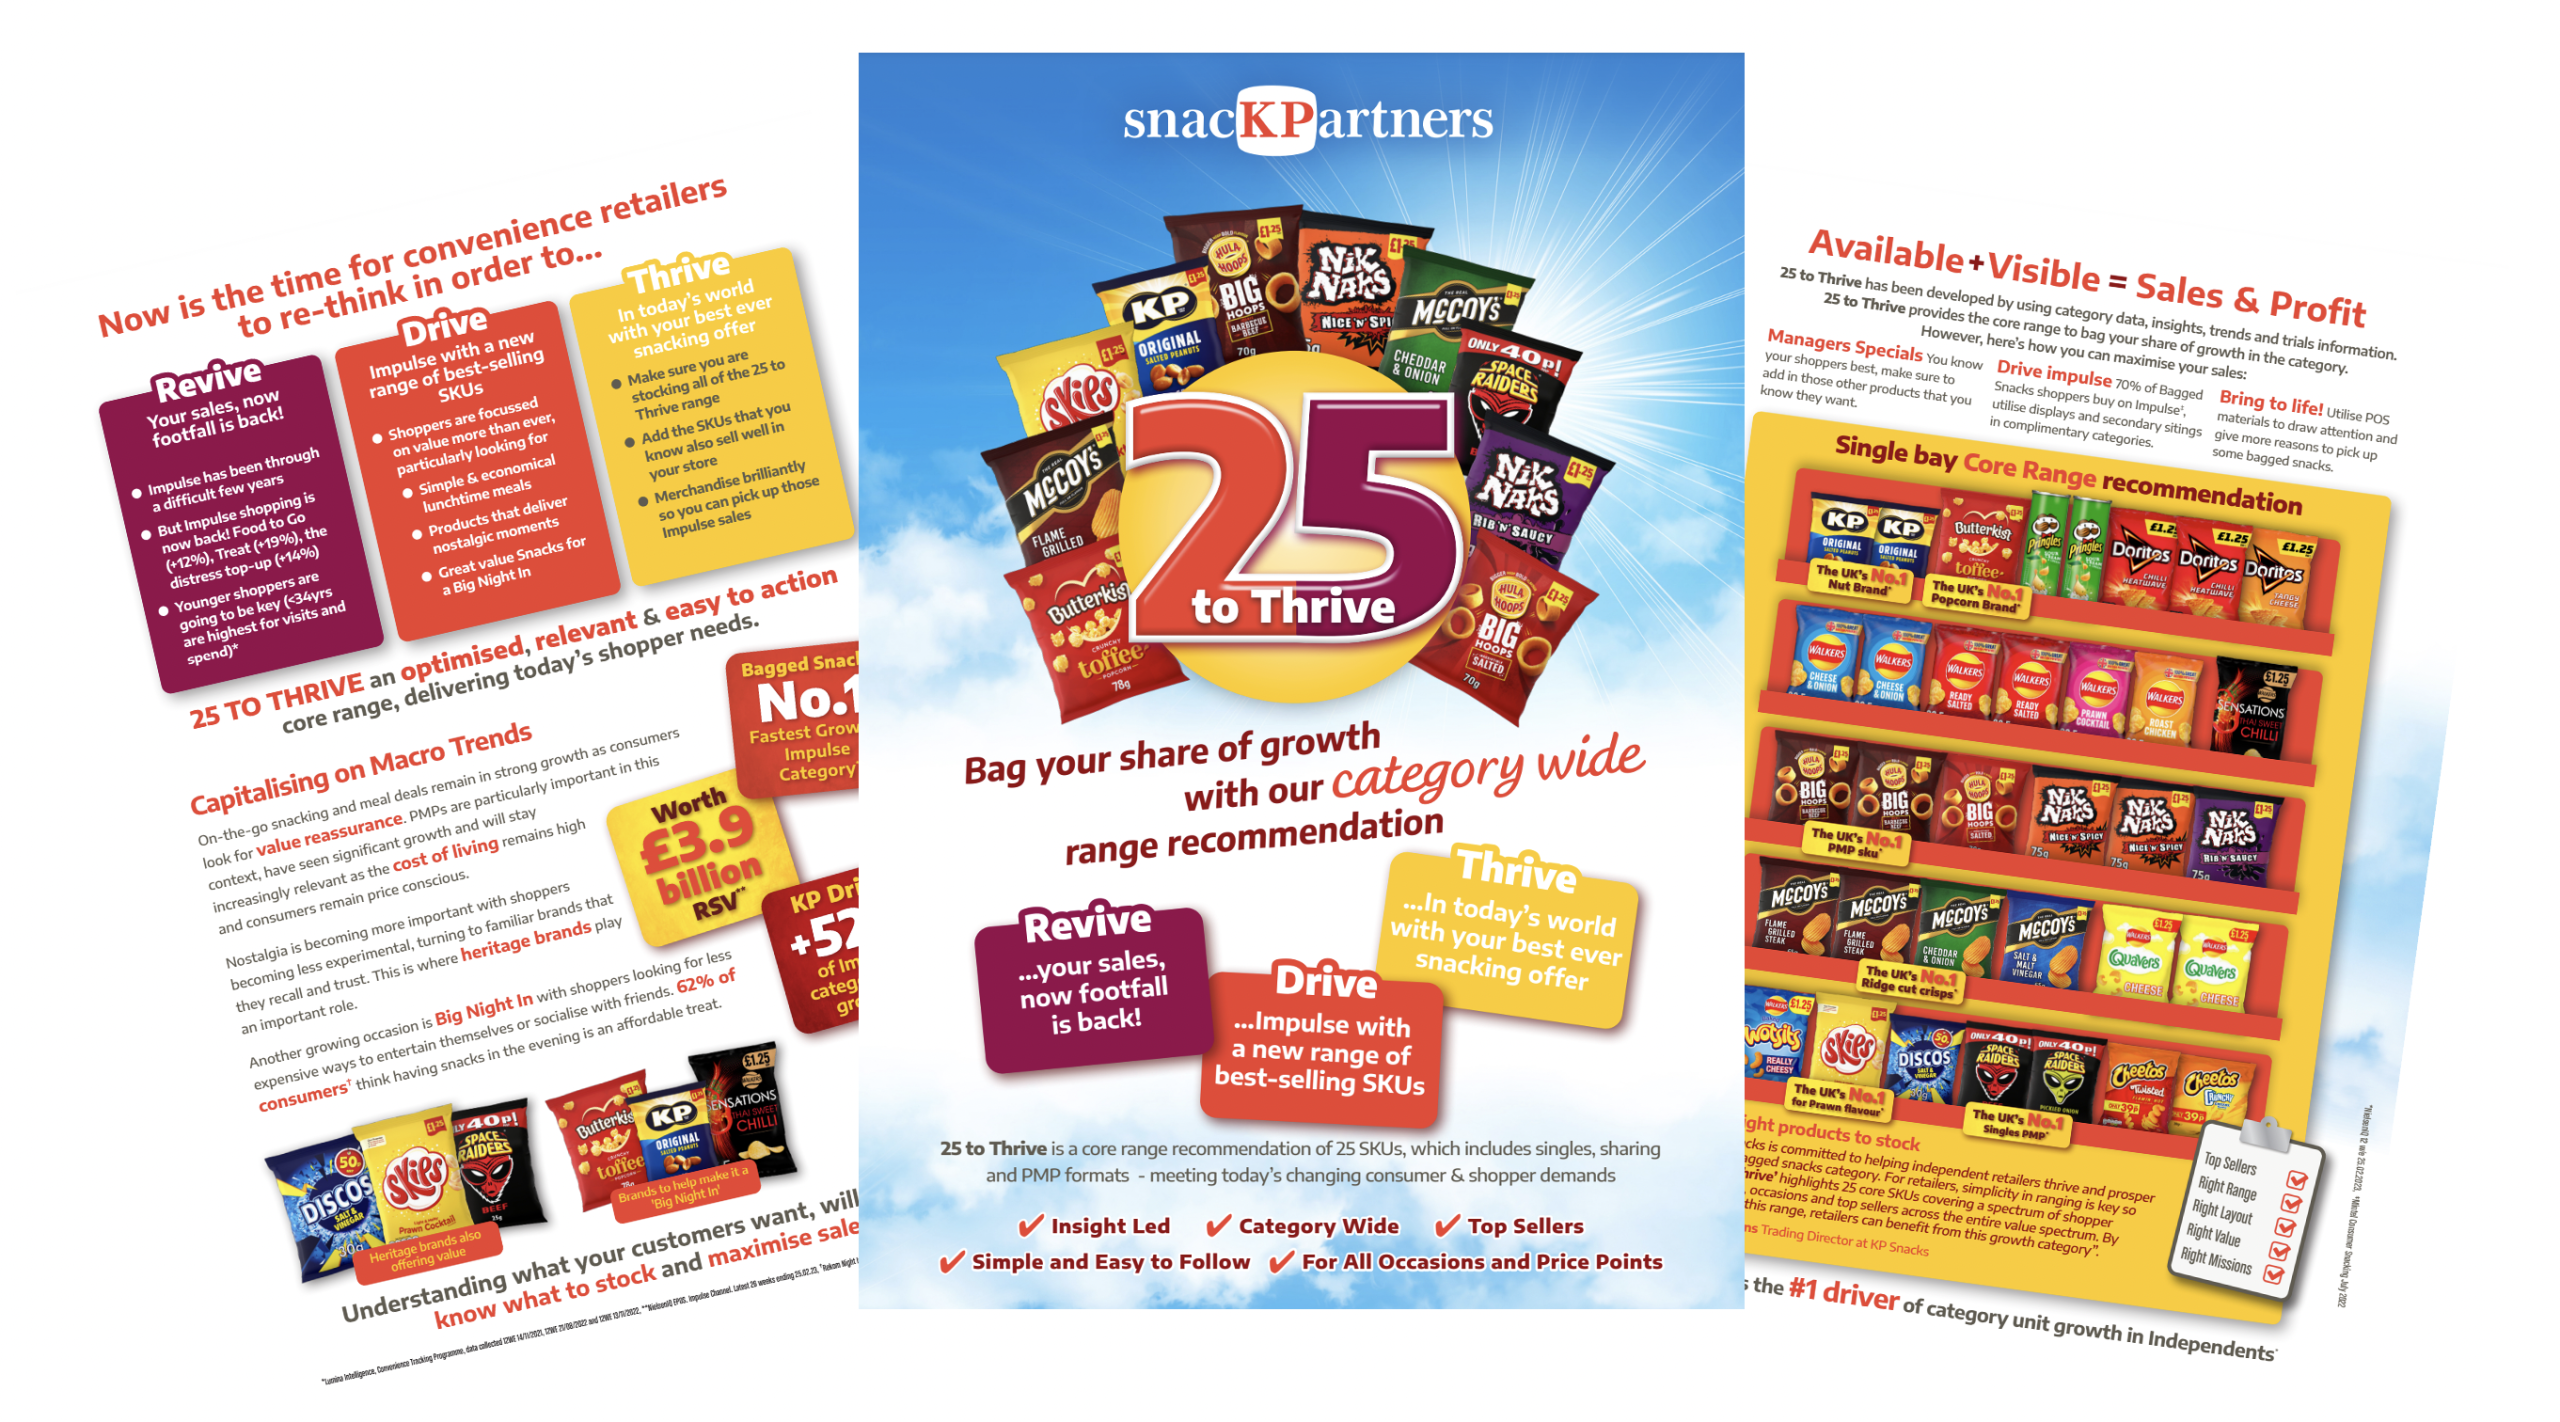 KP Snacks launches new retailer ranging advice, ‘25 TO THRIVE’